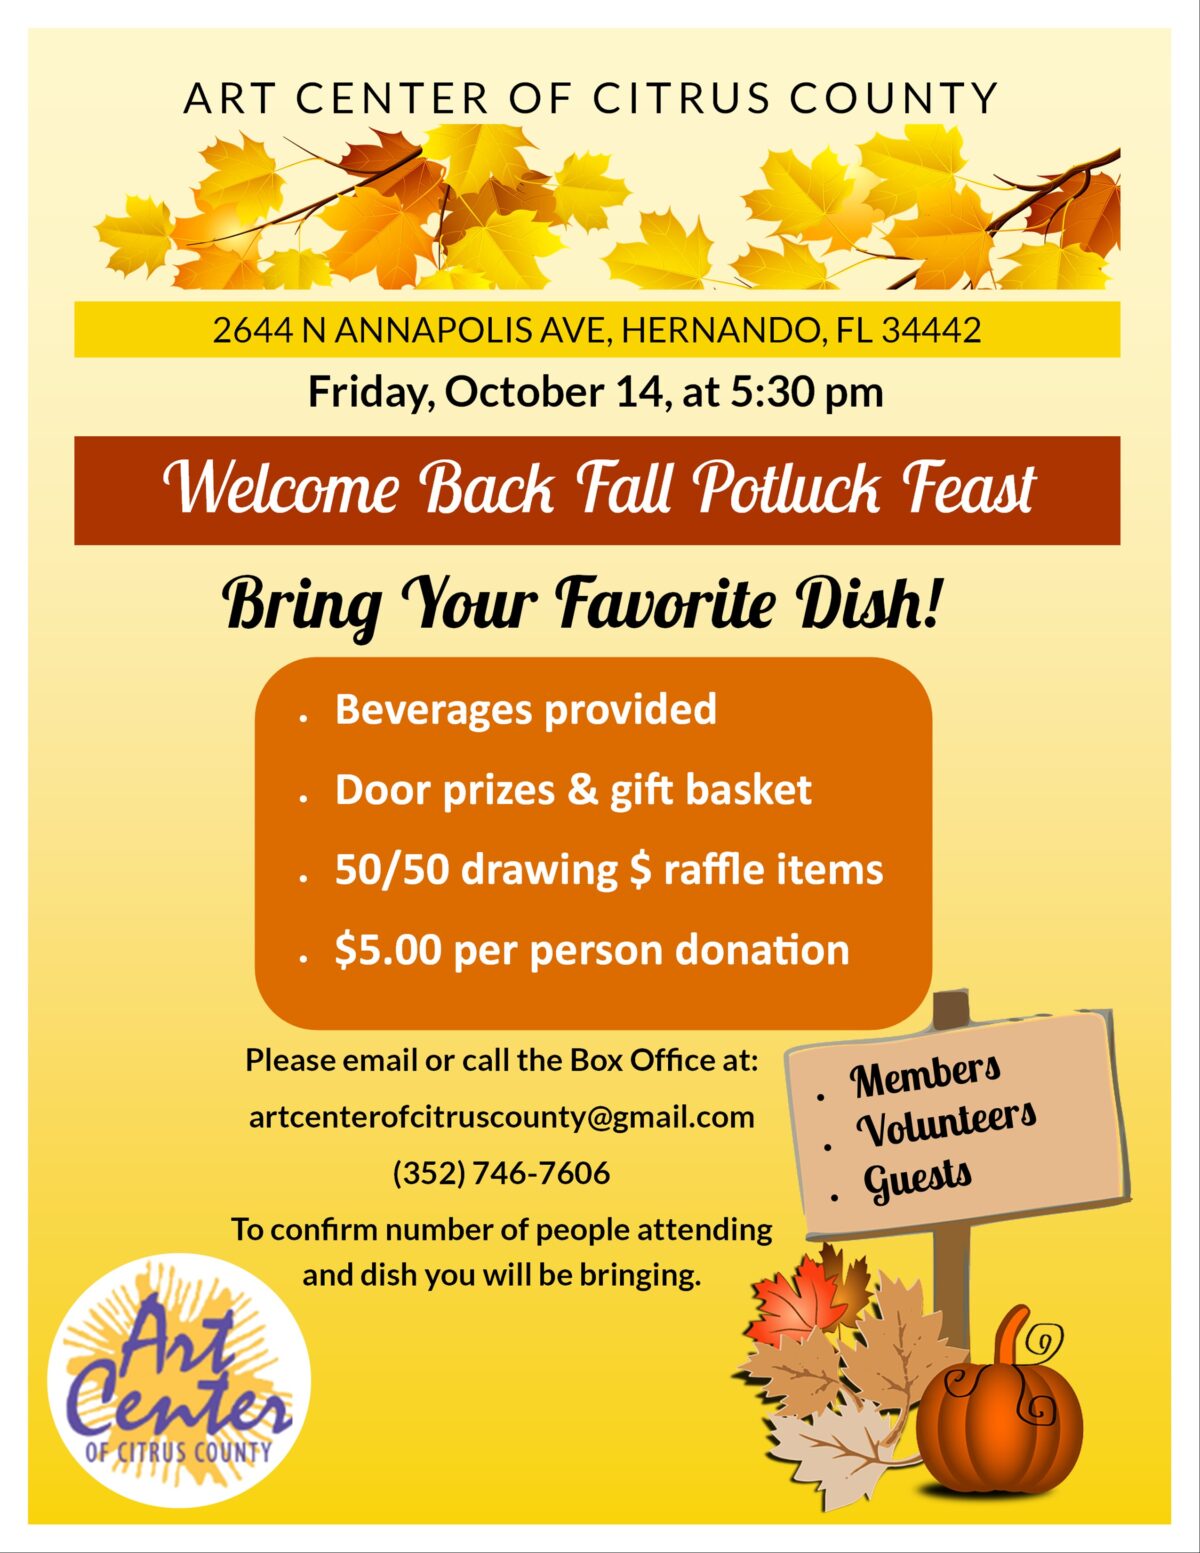 Welcome Back Fall Potluck Feast Friday, Oct. 14, 5:30 PM